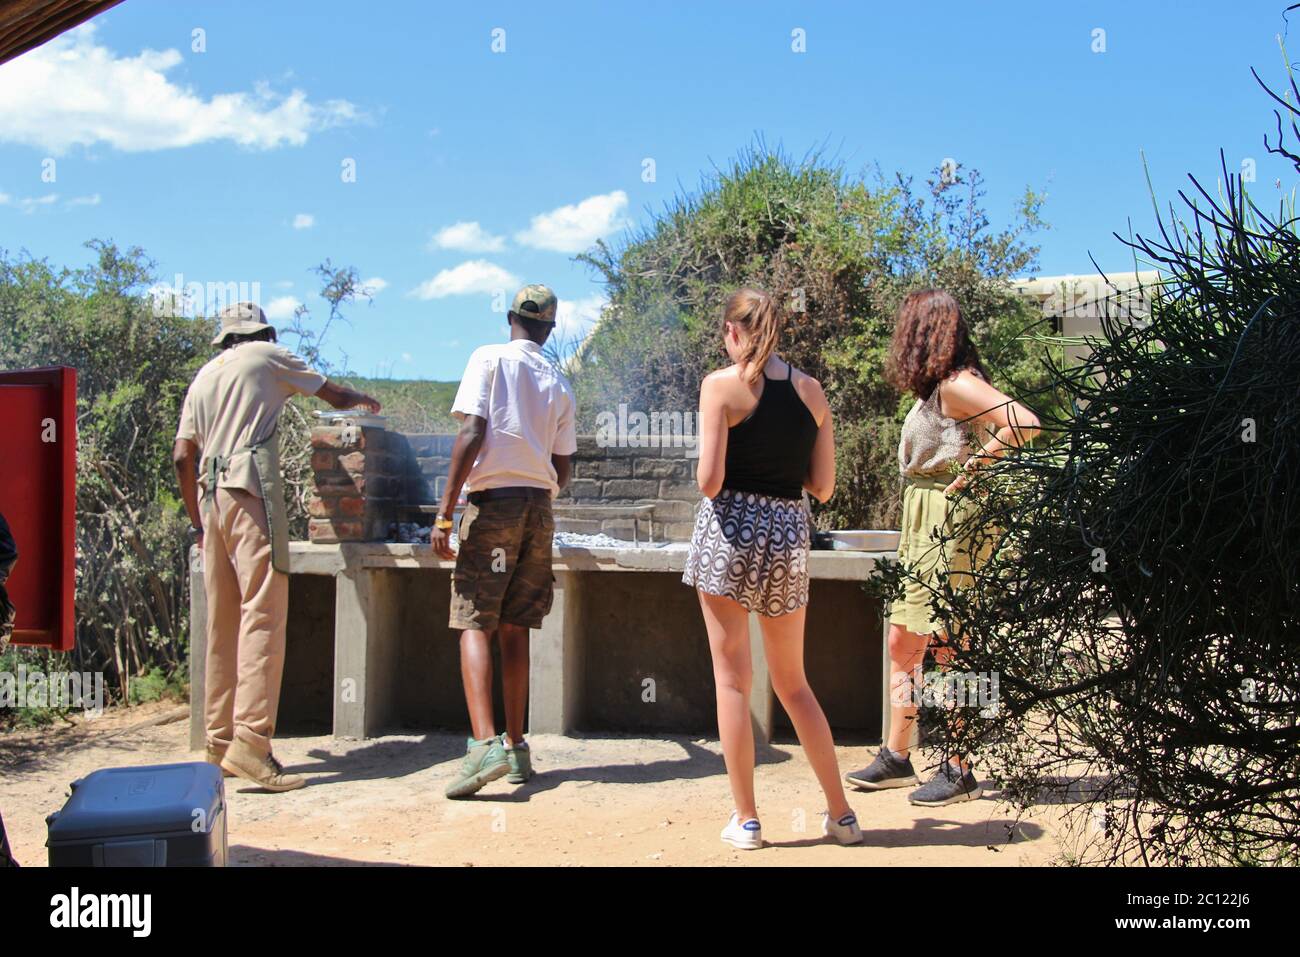 Two safari guides grill meat for the safari participants at a picnic site in Addo Elephant Park. Two watching tourists besides the grill. Africa. Stock Photo